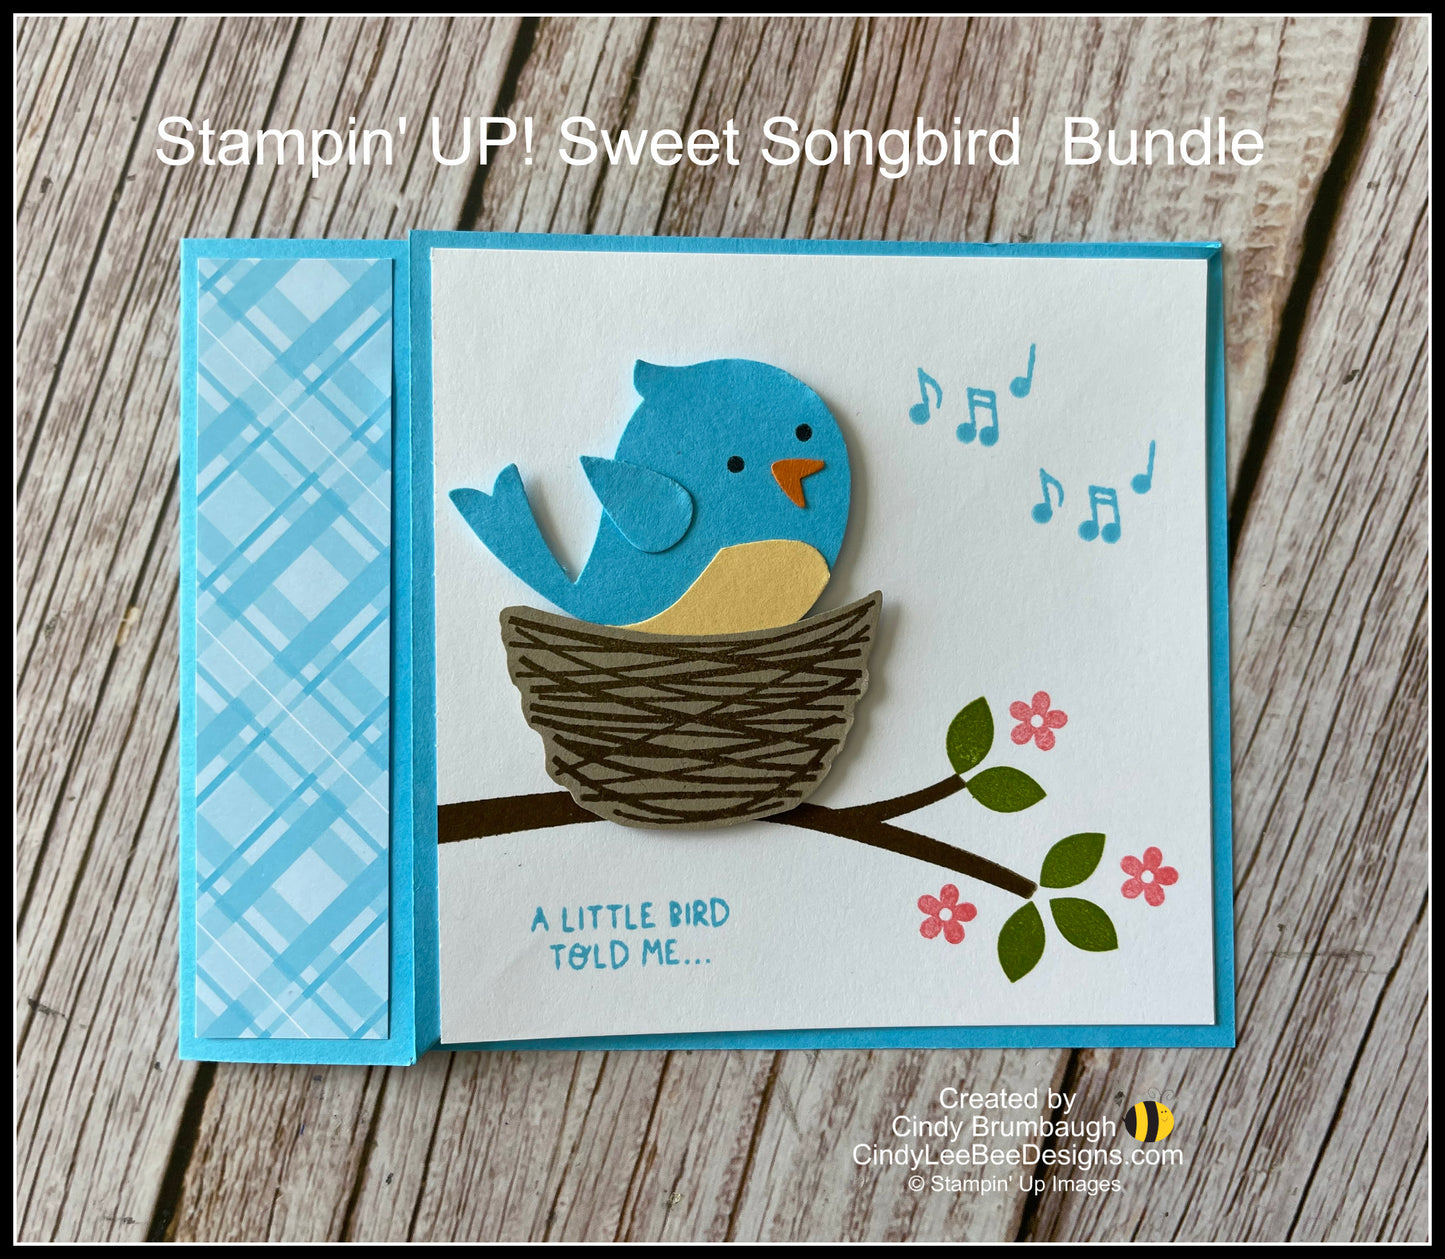 Stampin' Up! Sweet Songbirds Punch Bundle